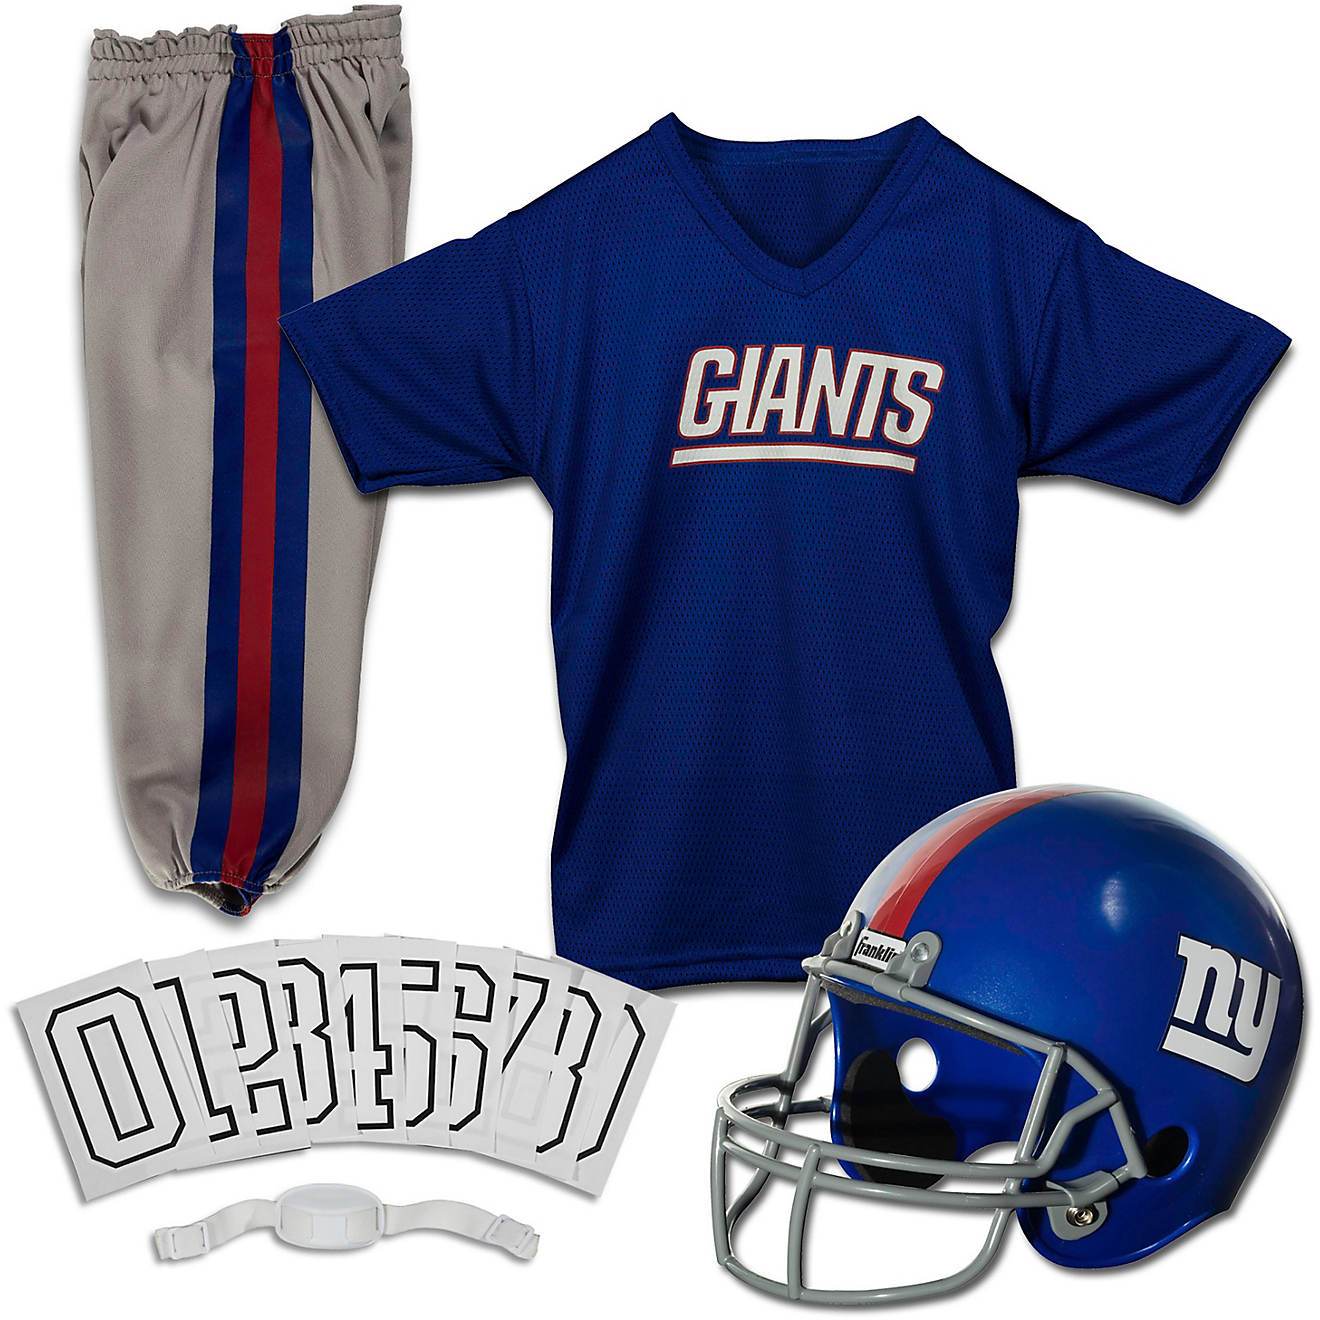 Franklin Youth New York Giants Deluxe Football Uniform Set